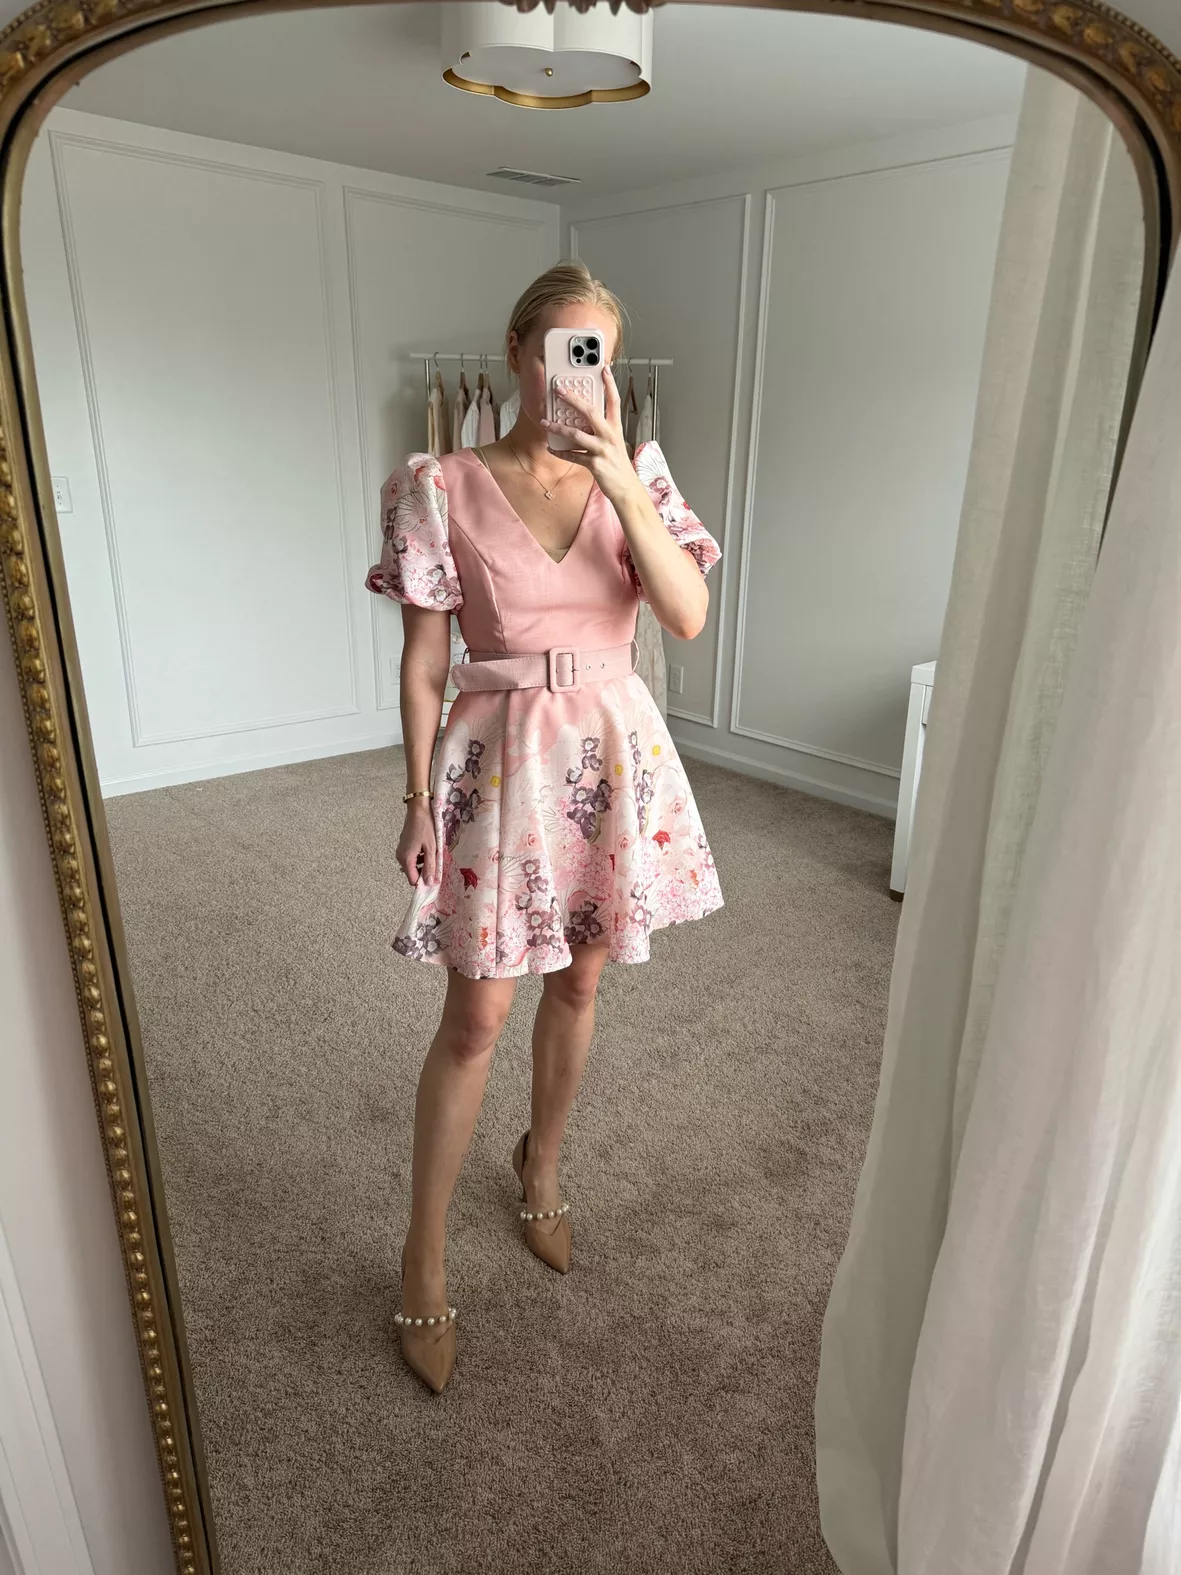 Easter outfits you will love - take you pick from these easter looks